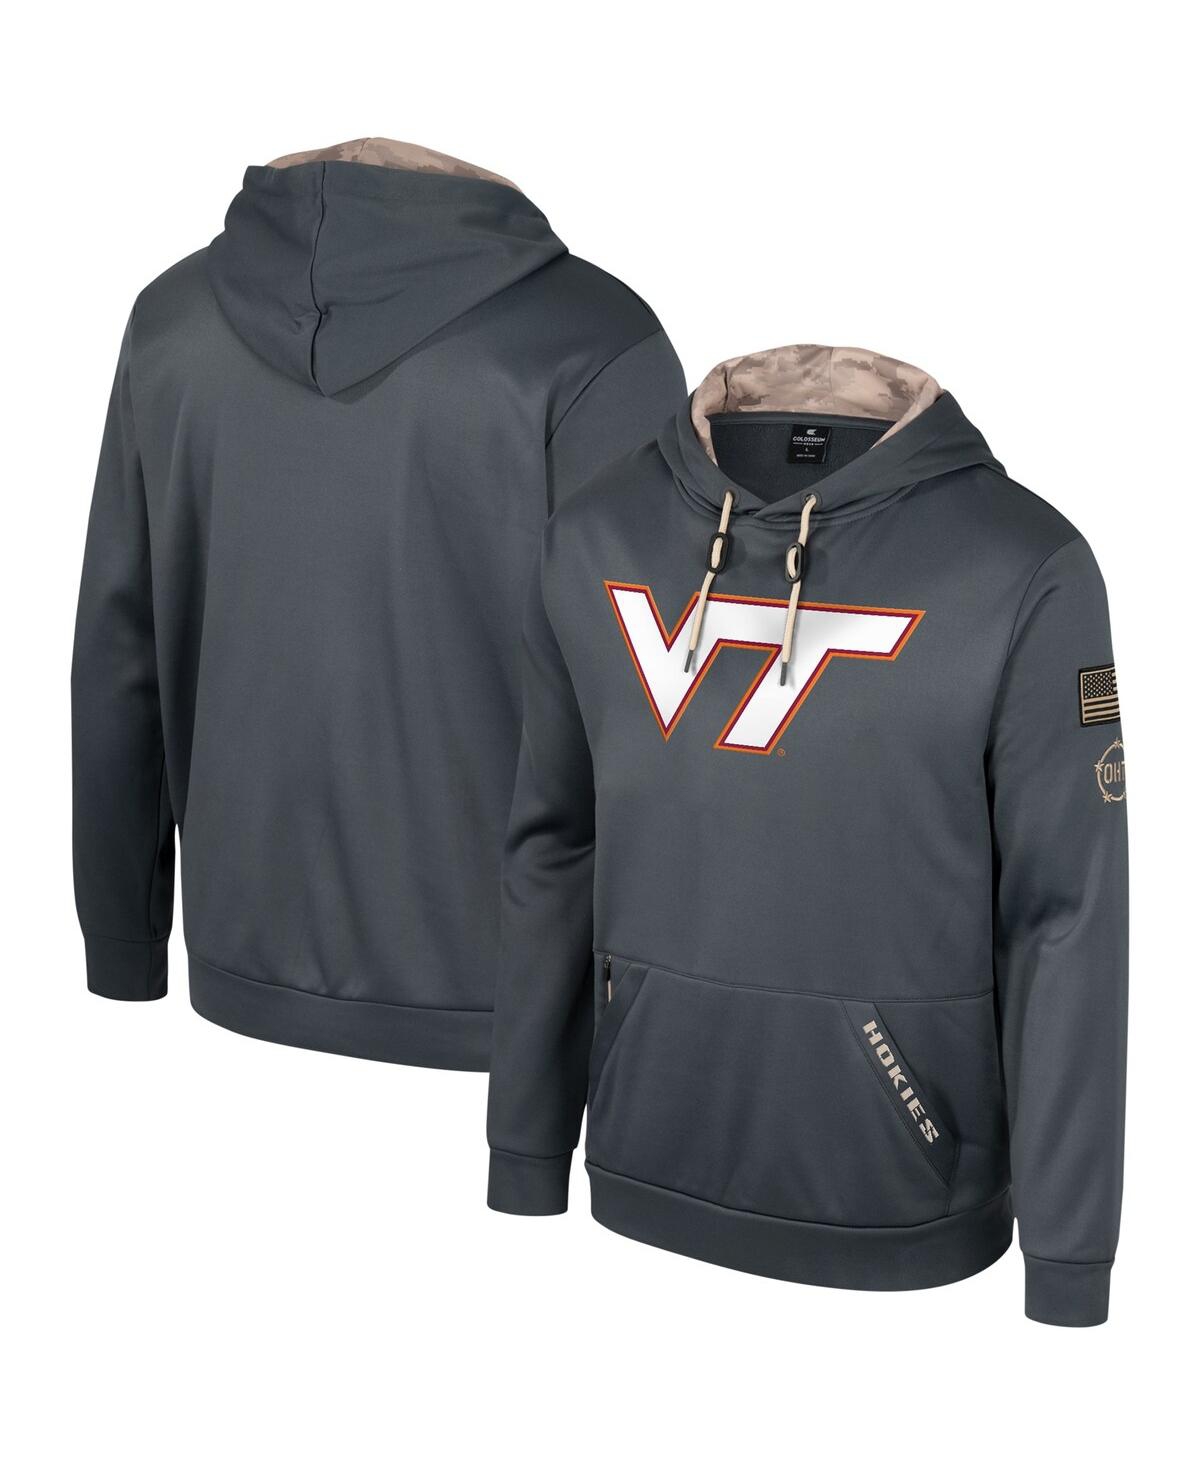 Shop Colosseum Men's  Charcoal Virginia Tech Hookies Oht Military-inspired Appreciation Pullover Hoodie